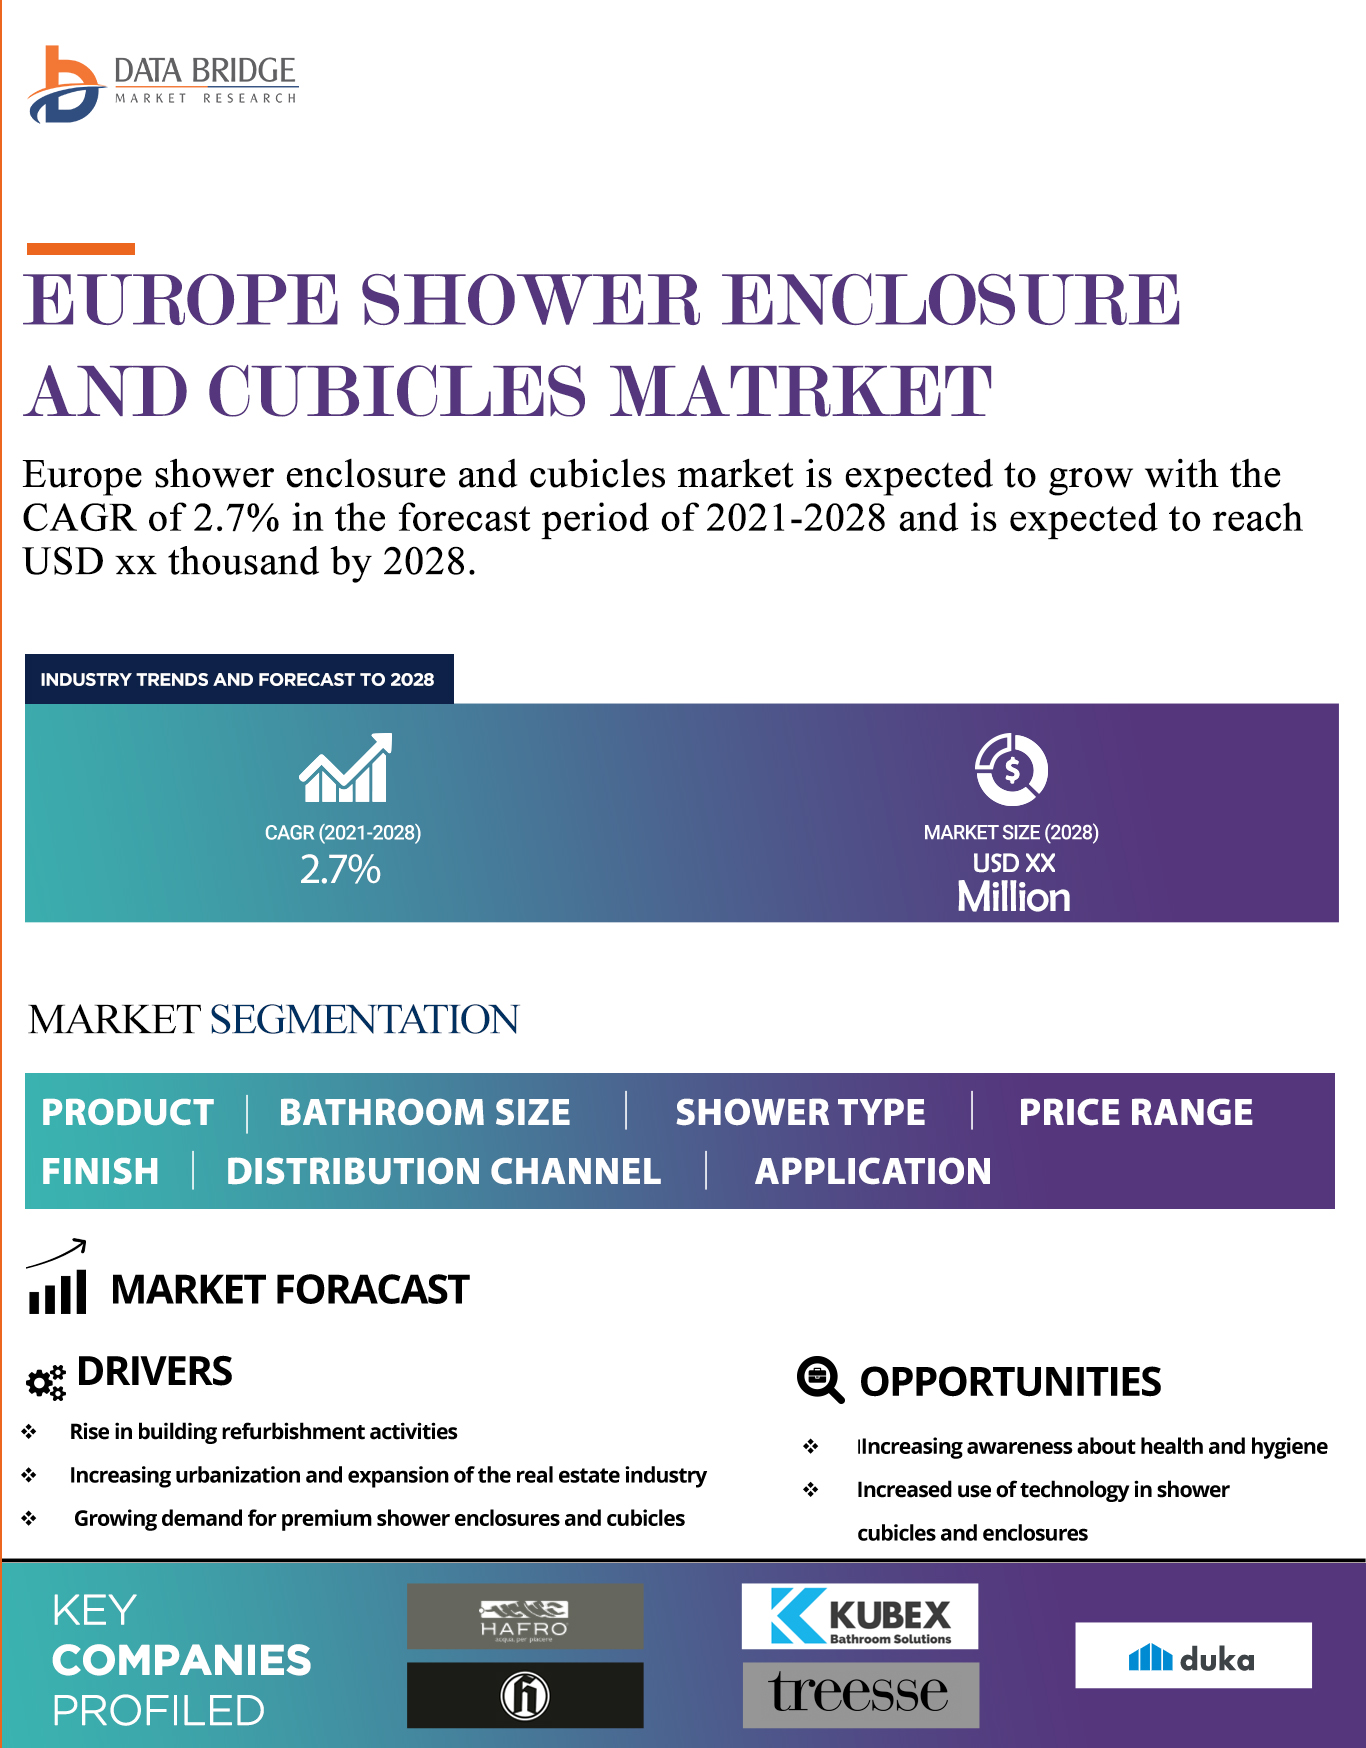 Europe Shower Enclosure and Cubicles Market